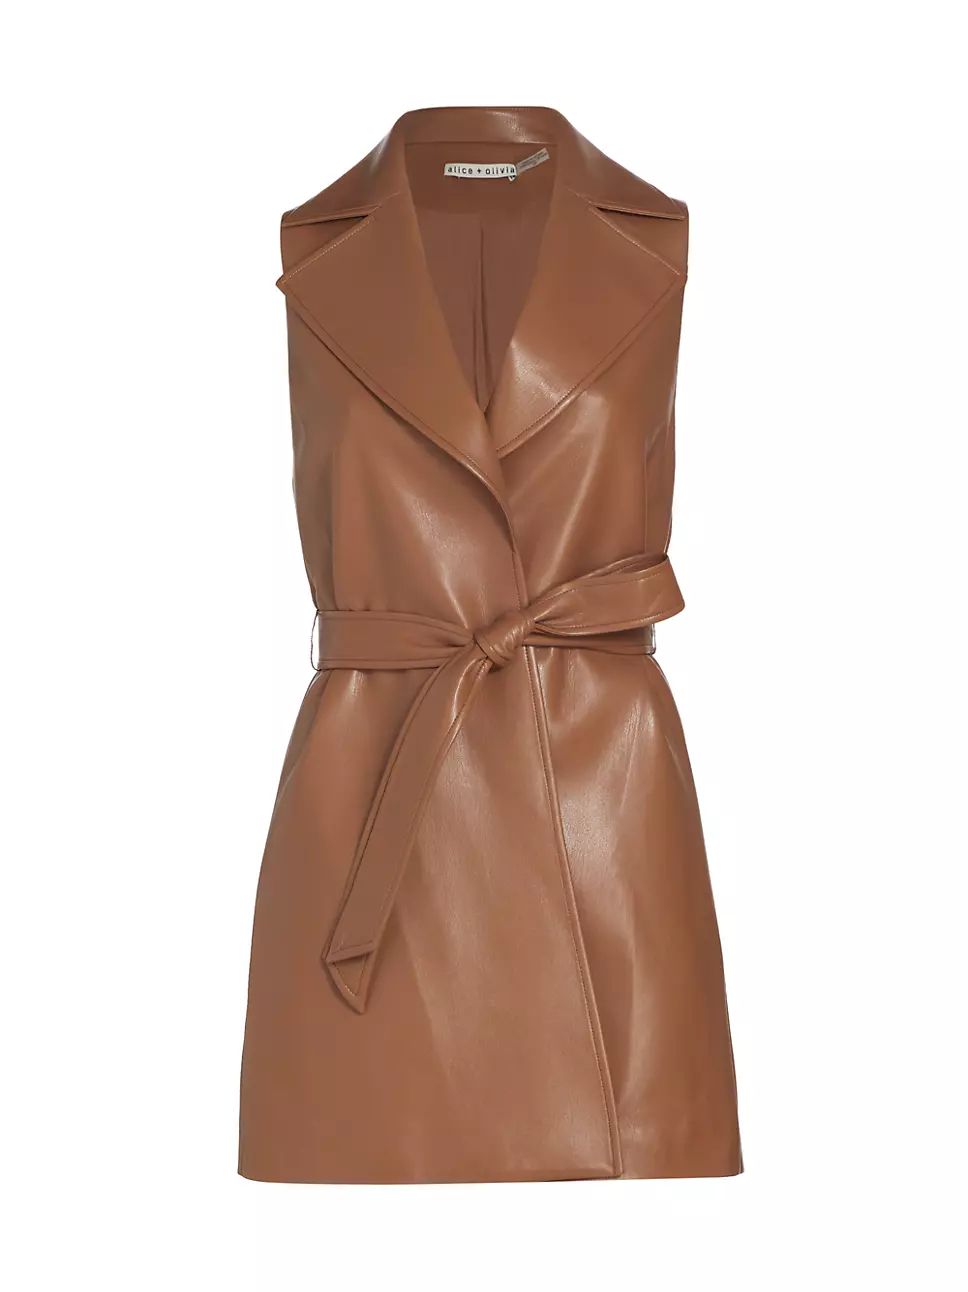 Alice + Olivia Rozlynn Faux Leather Belted Dress | Saks Fifth Avenue